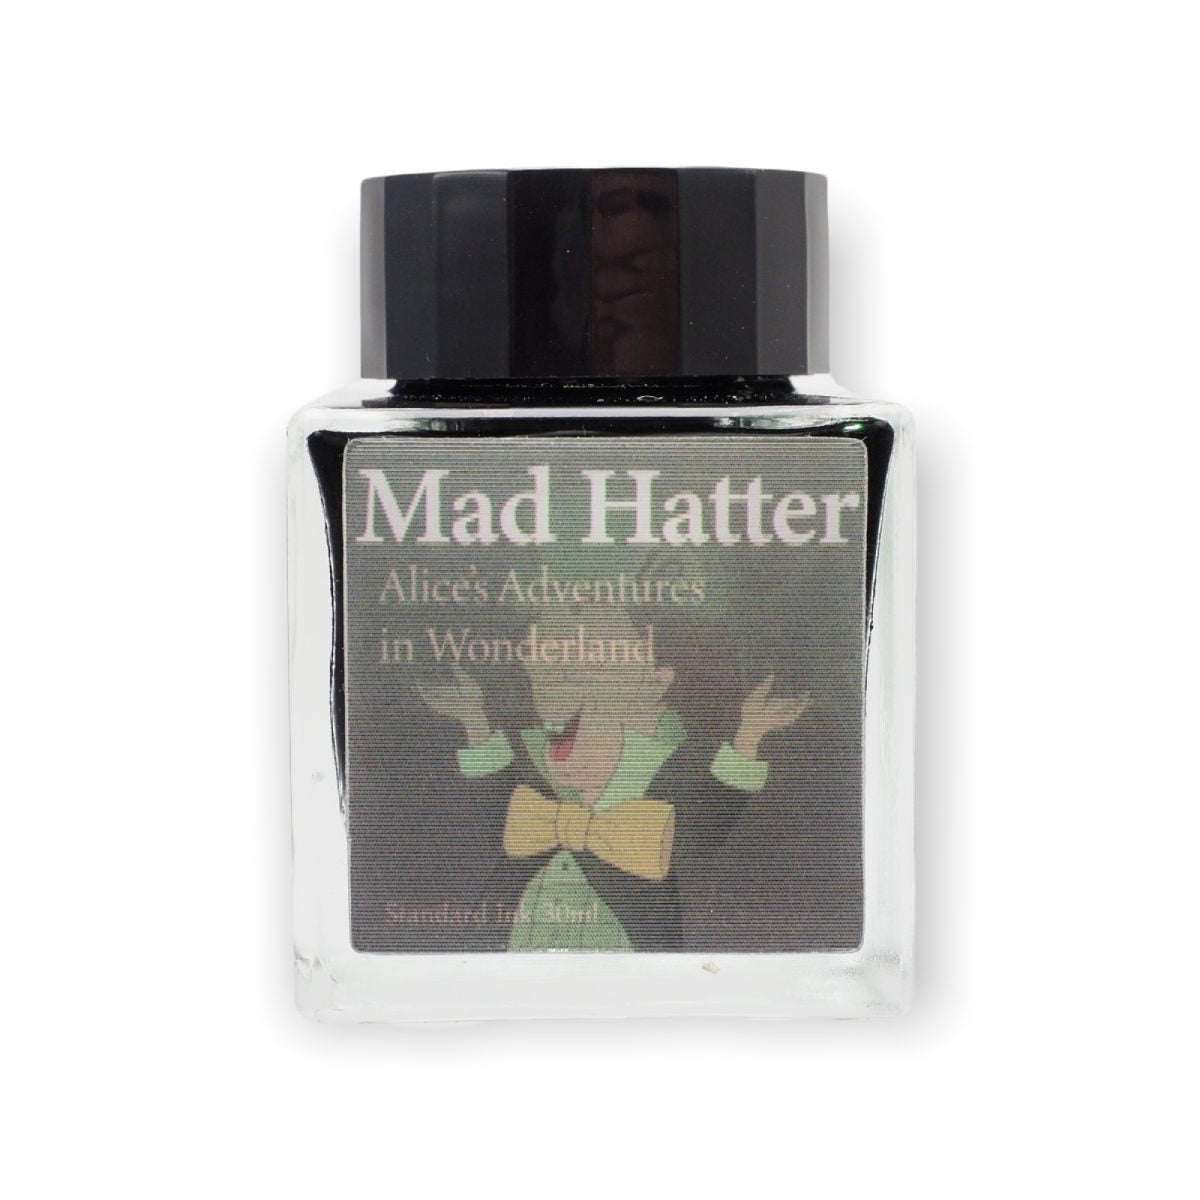 Wearingeul - Mad Hatter